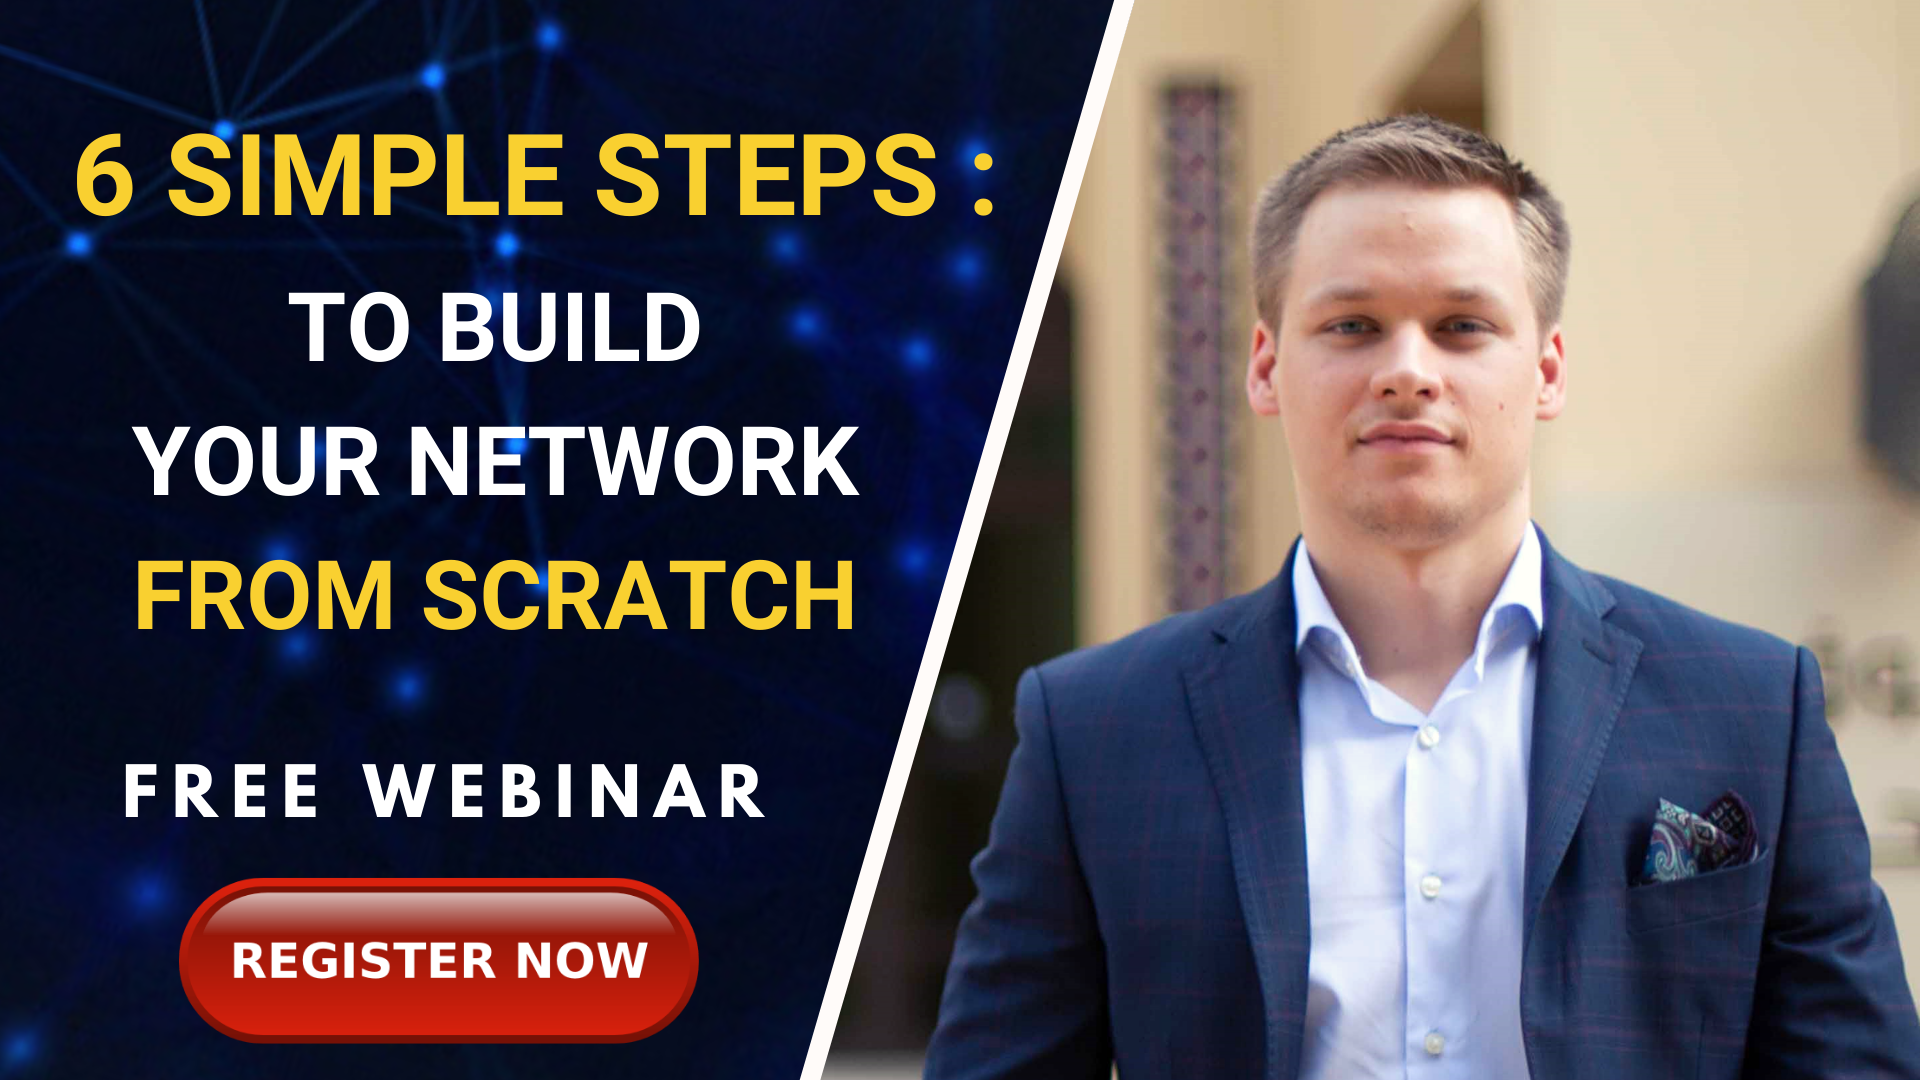 [ FREE WEBINAR ] 6 Simple Steps To Build Your Network From Scratch